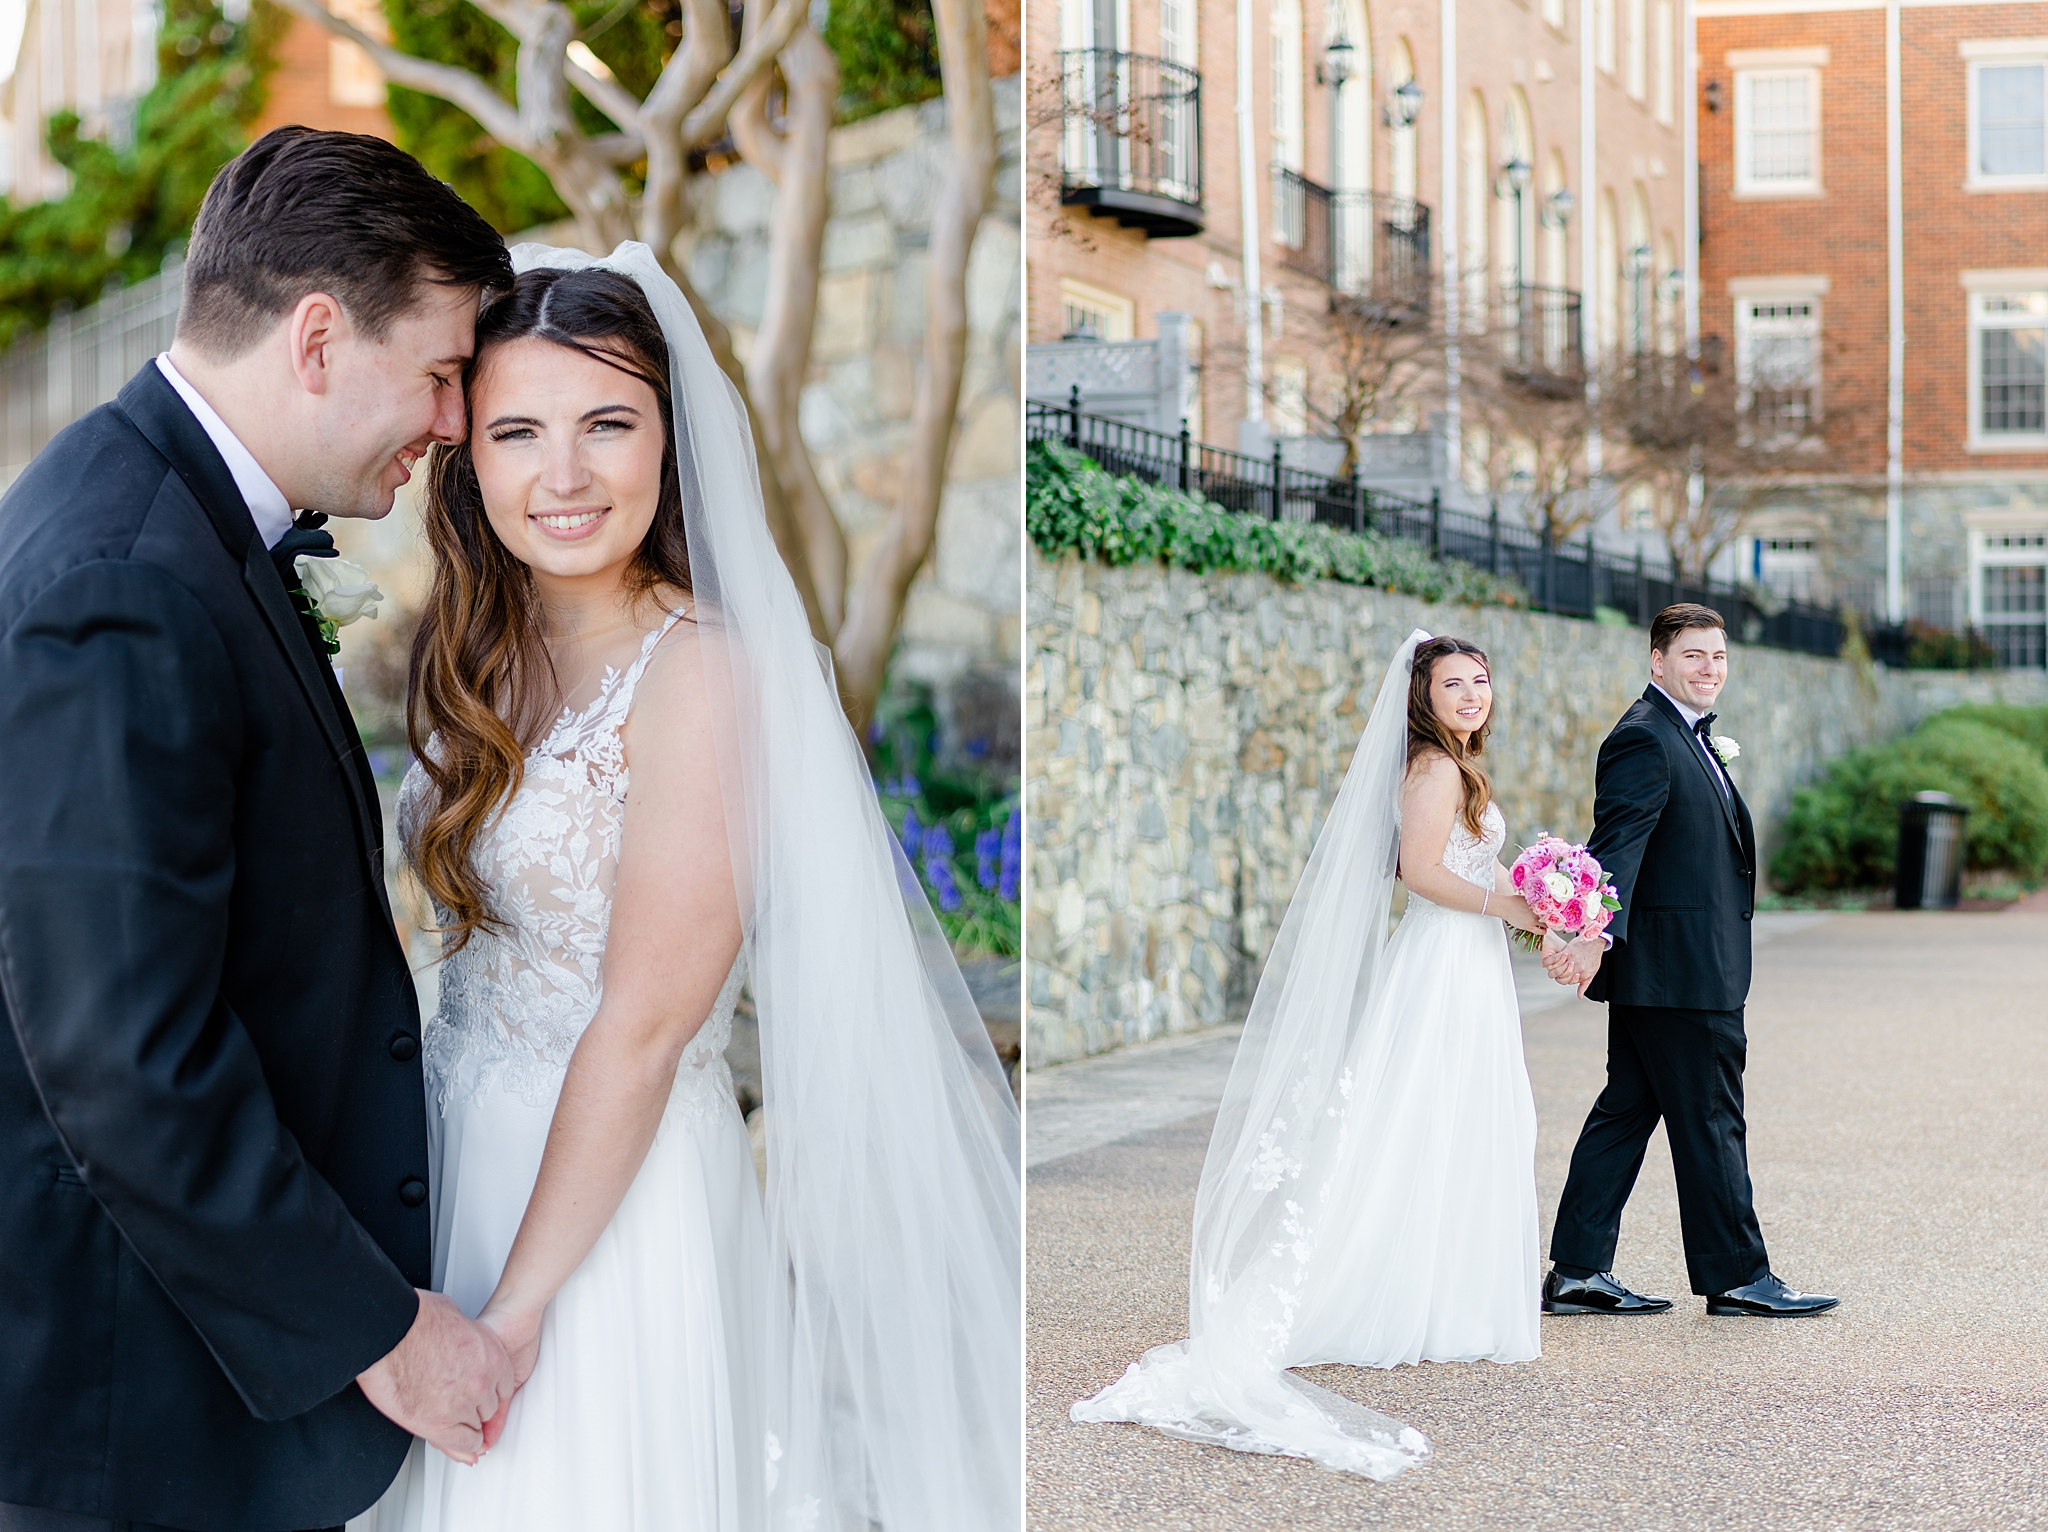 Old Town Alexandria wedding pictures.